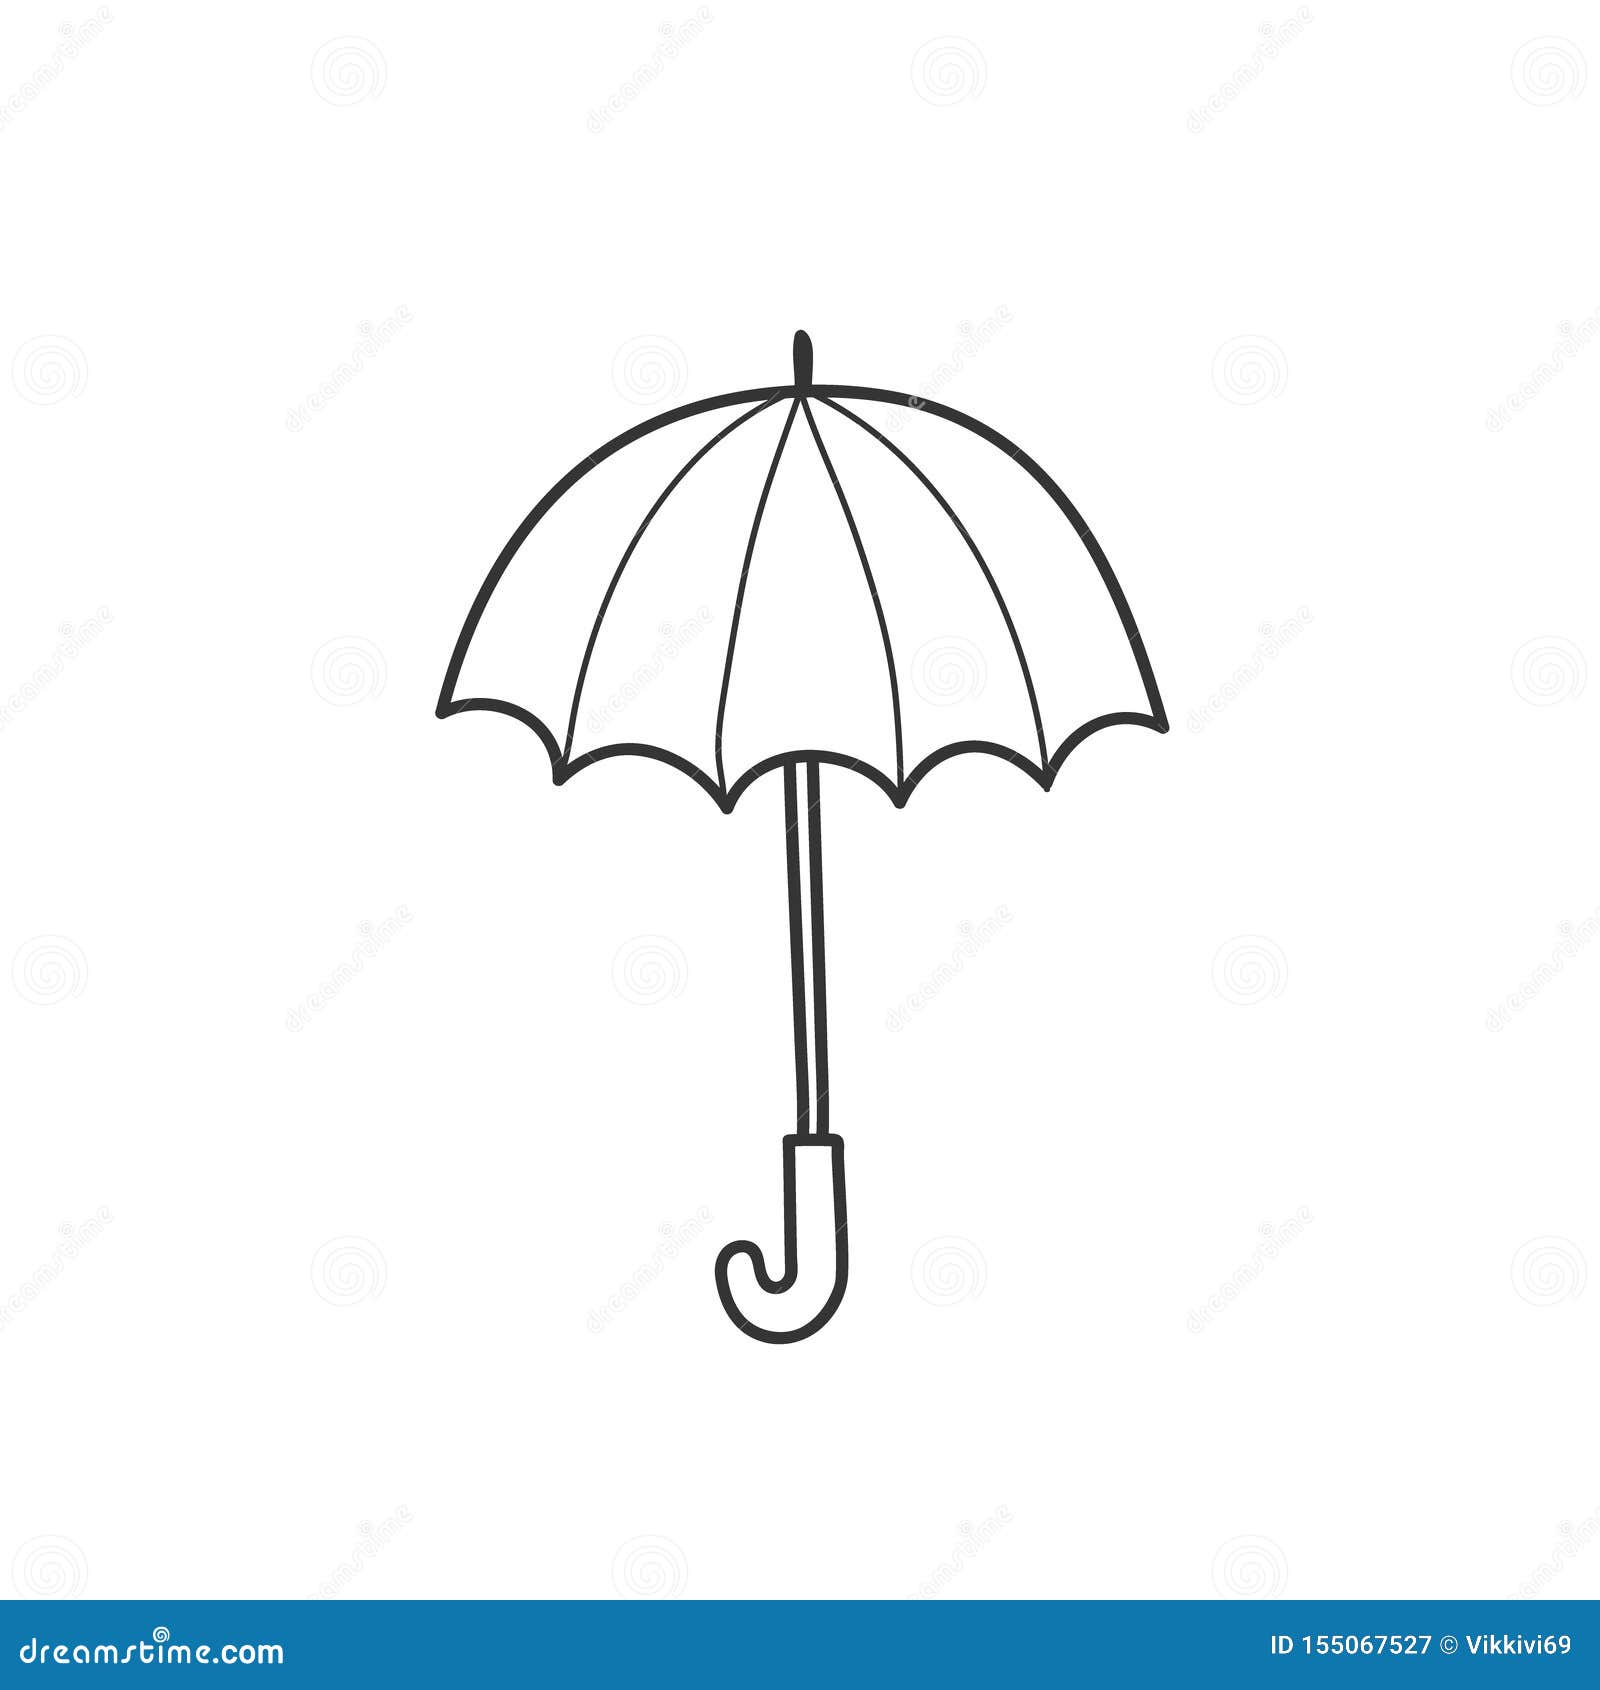 How to Draw an Umbrella Step by Step - EasyLineDrawing